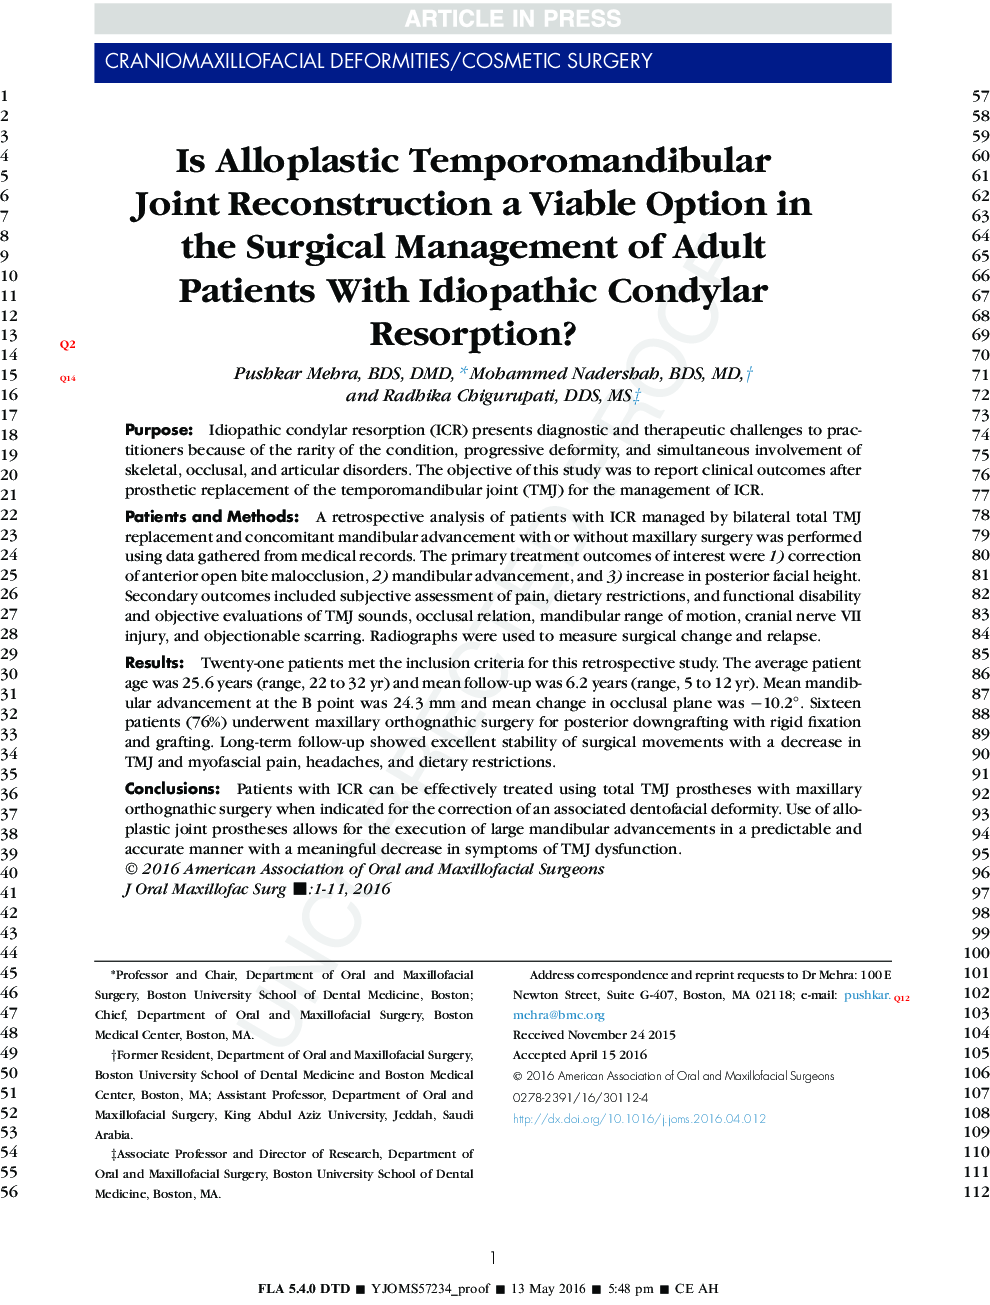 Is Alloplastic Temporomandibular Joint Reconstruction a Viable Option in the Surgical Management of Adult Patients With Idiopathic Condylar Resorption?